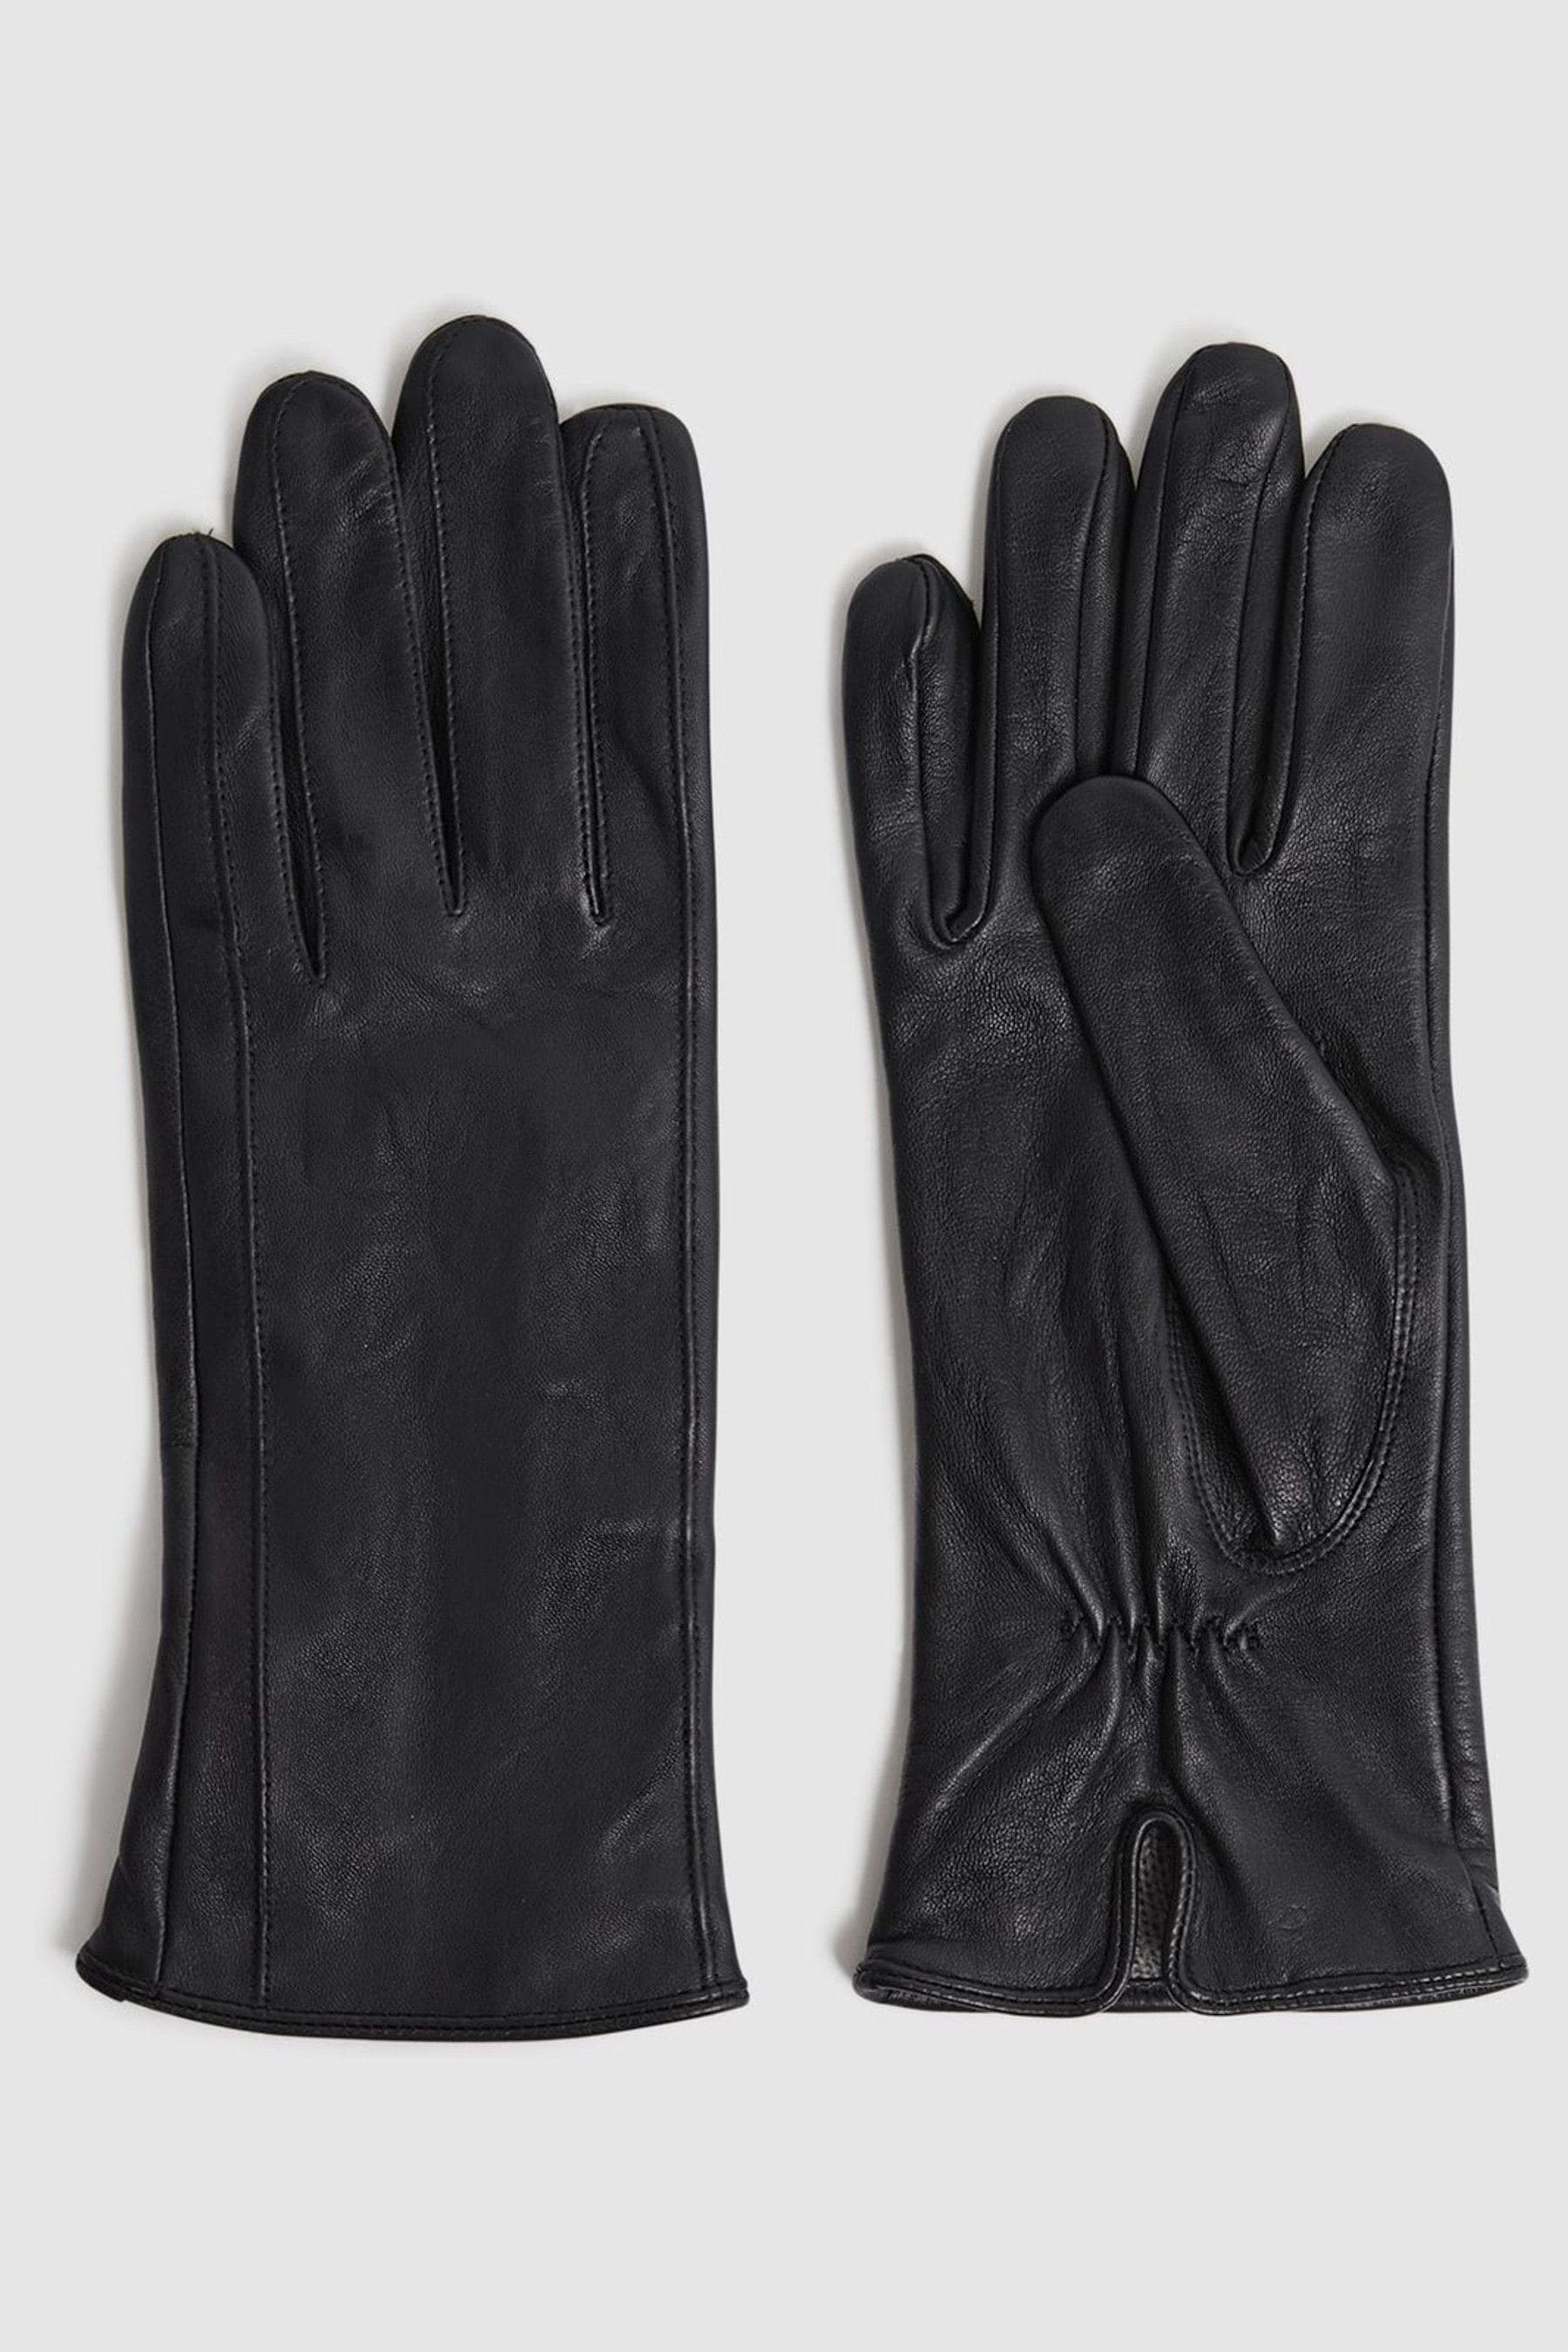 Reiss Giselle - Black Leather Ruched Gloves, M-l